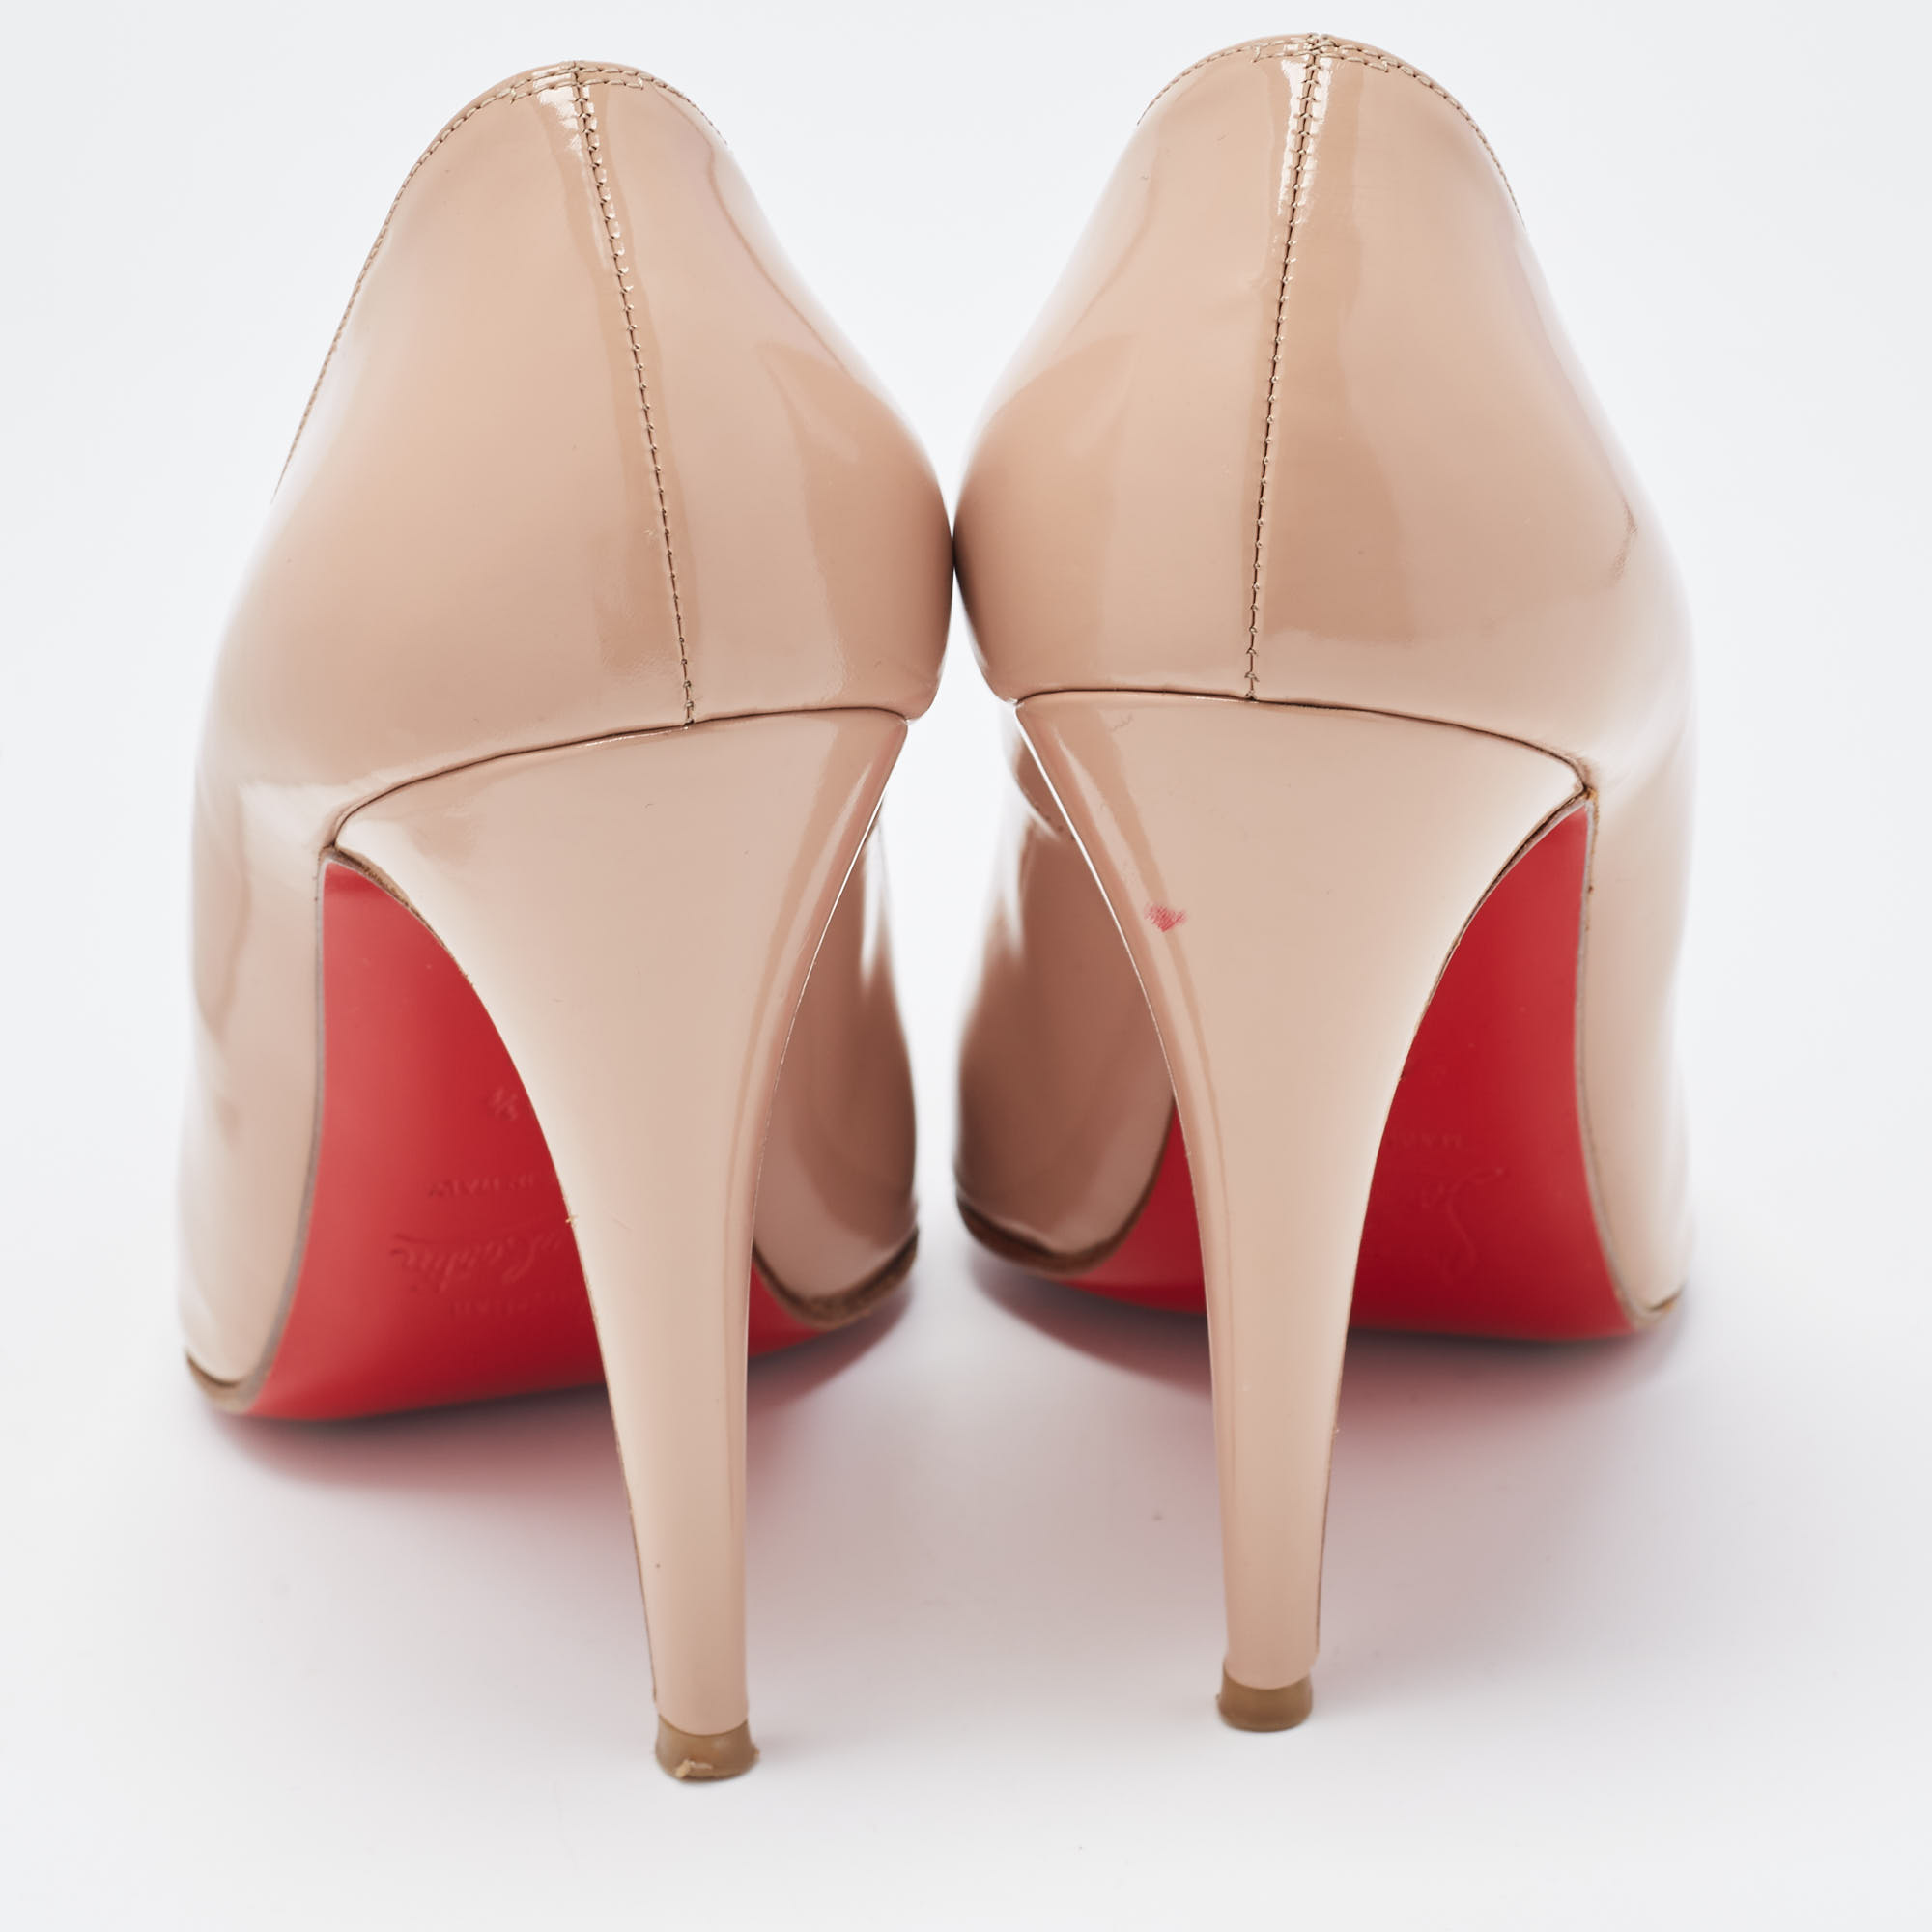 Christian Louboutin Beige Leather Simple Pumps Size 40.5